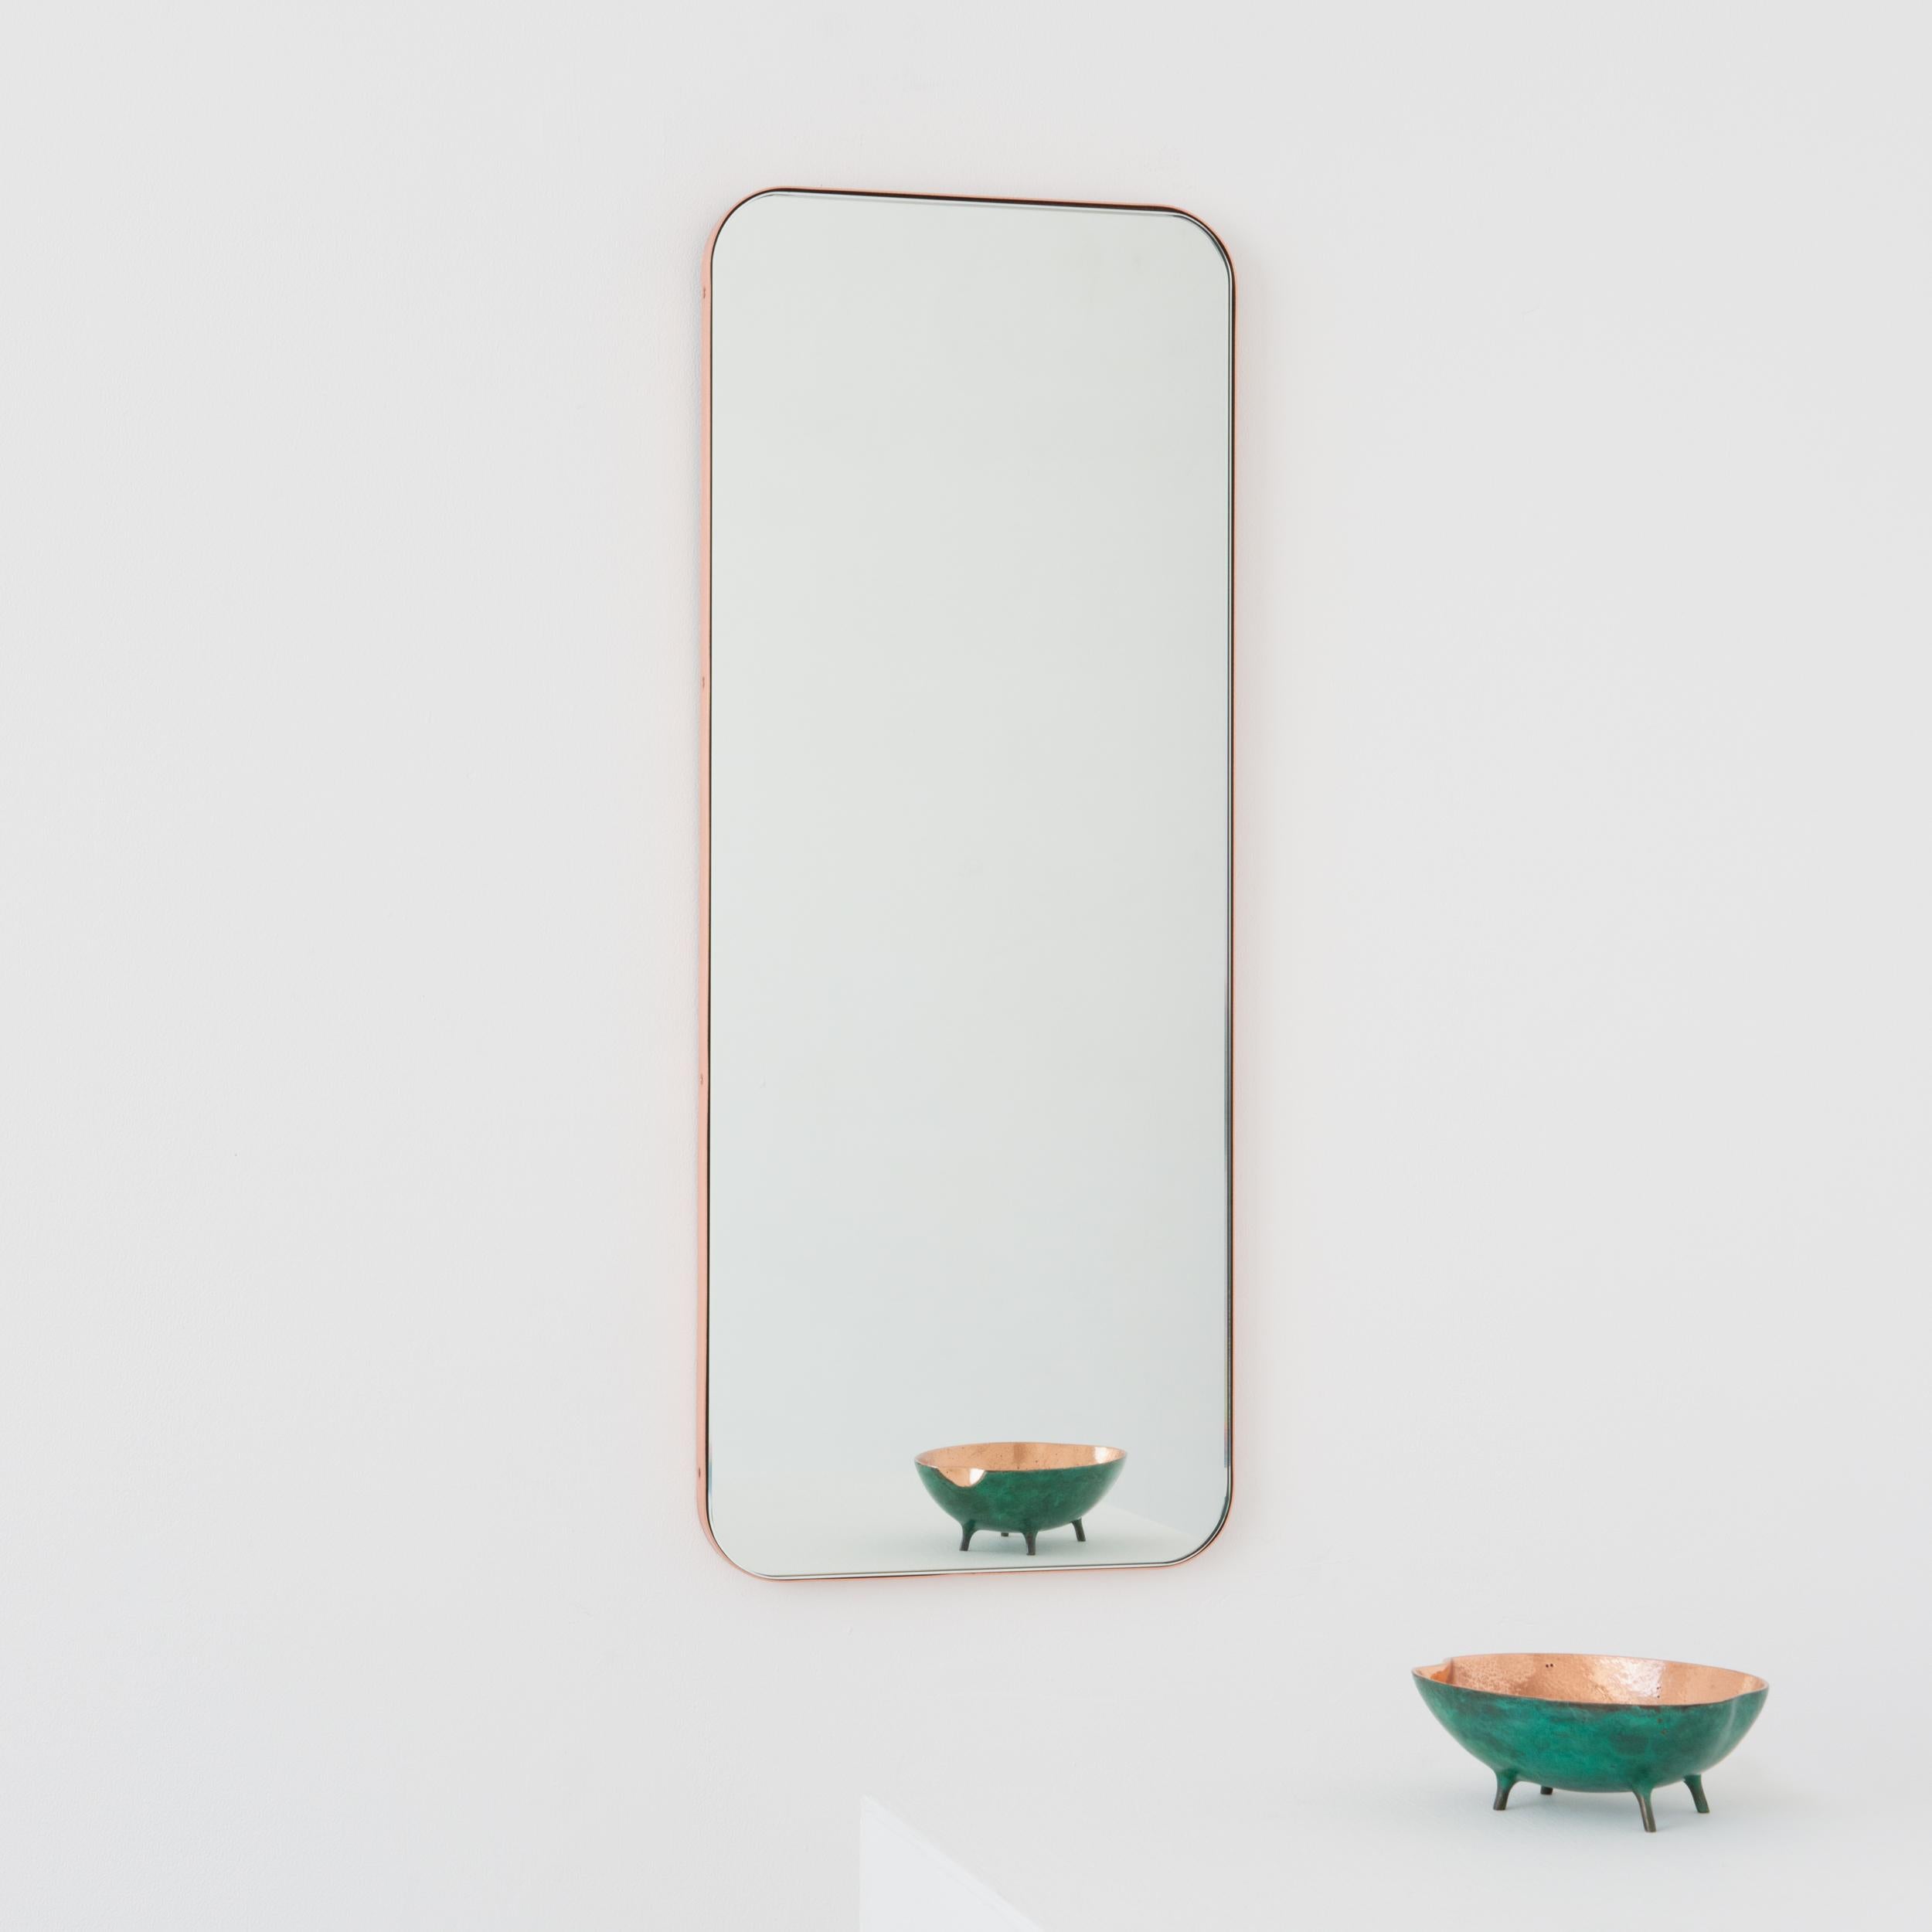 Modern rectangular mirror with an elegant solid brushed copper frame. Part of the charming Quadris™ collection, designed and handcrafted in London, UK. 

Our mirrors are designed with an integrated French cleat (split batten) system that ensures the